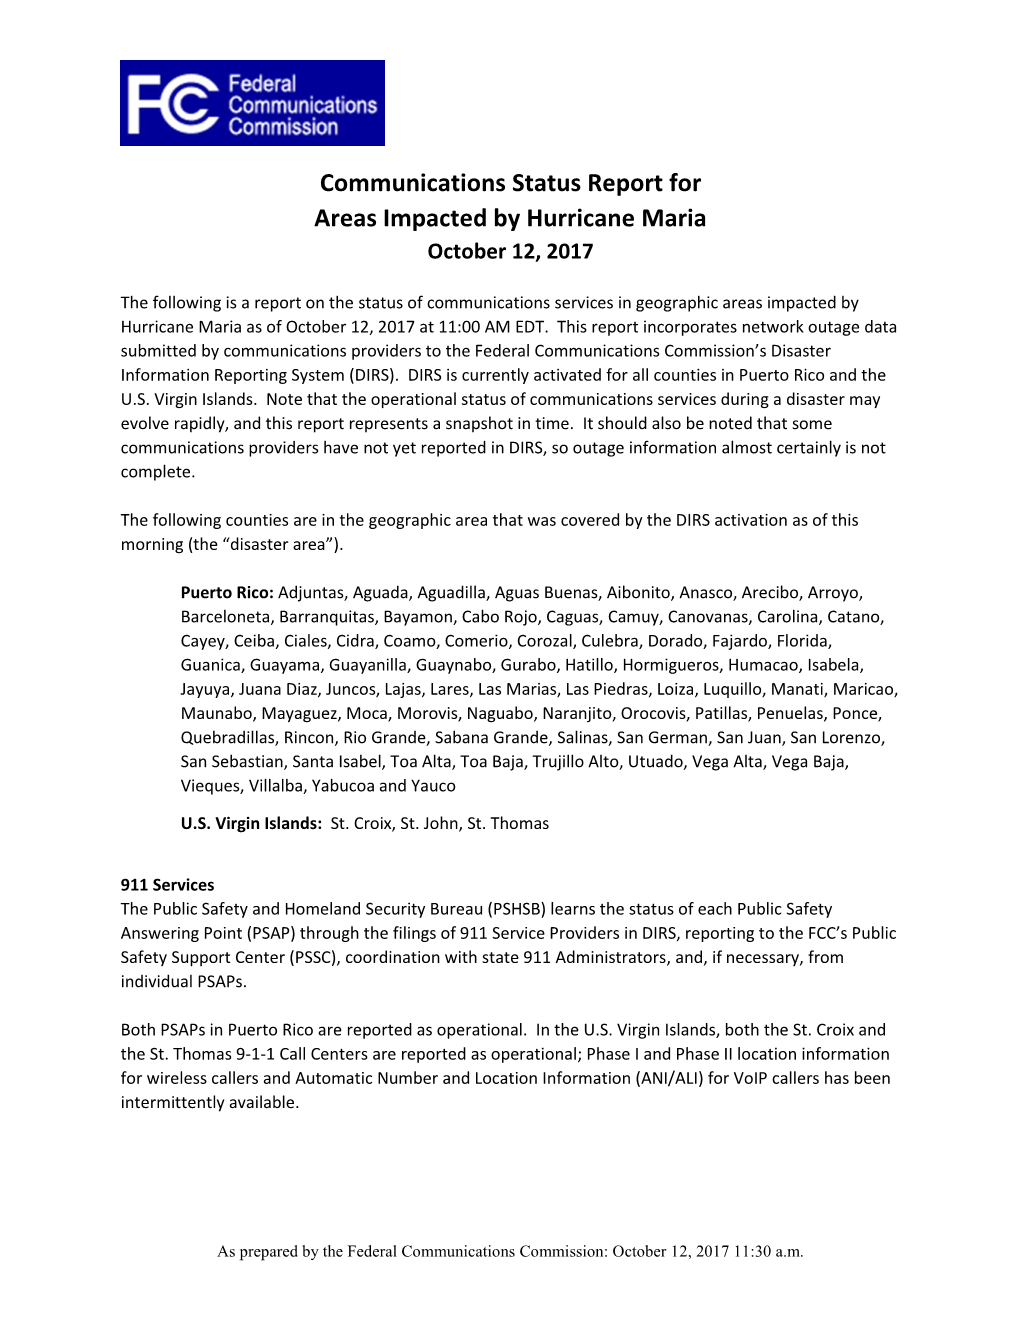 Communications Status Report for Areas Impacted by Hurricane Maria October 12, 2017